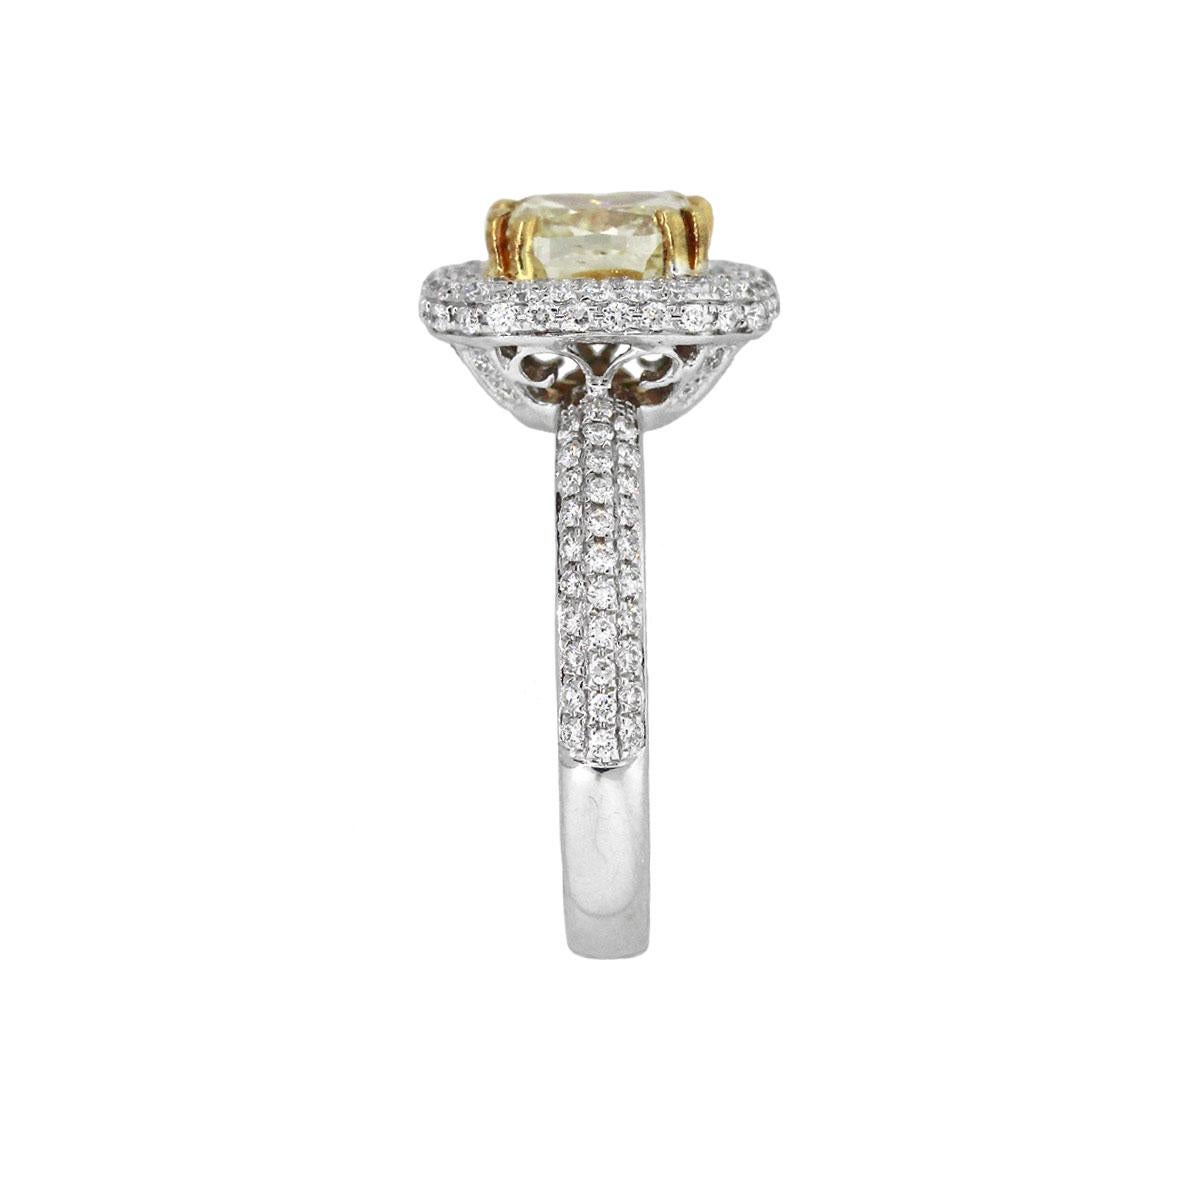 Material: 18k White Gold/18k yellow gold
Center Diamond Details: Approx. 2.01ct cushion diamond. Diamond is Fancy Yellow in color and SI in clarity
Adjacent Diamond Details: Approx. 0.81ctw of pave set round brilliant diamonds. Diamonds are G/H in